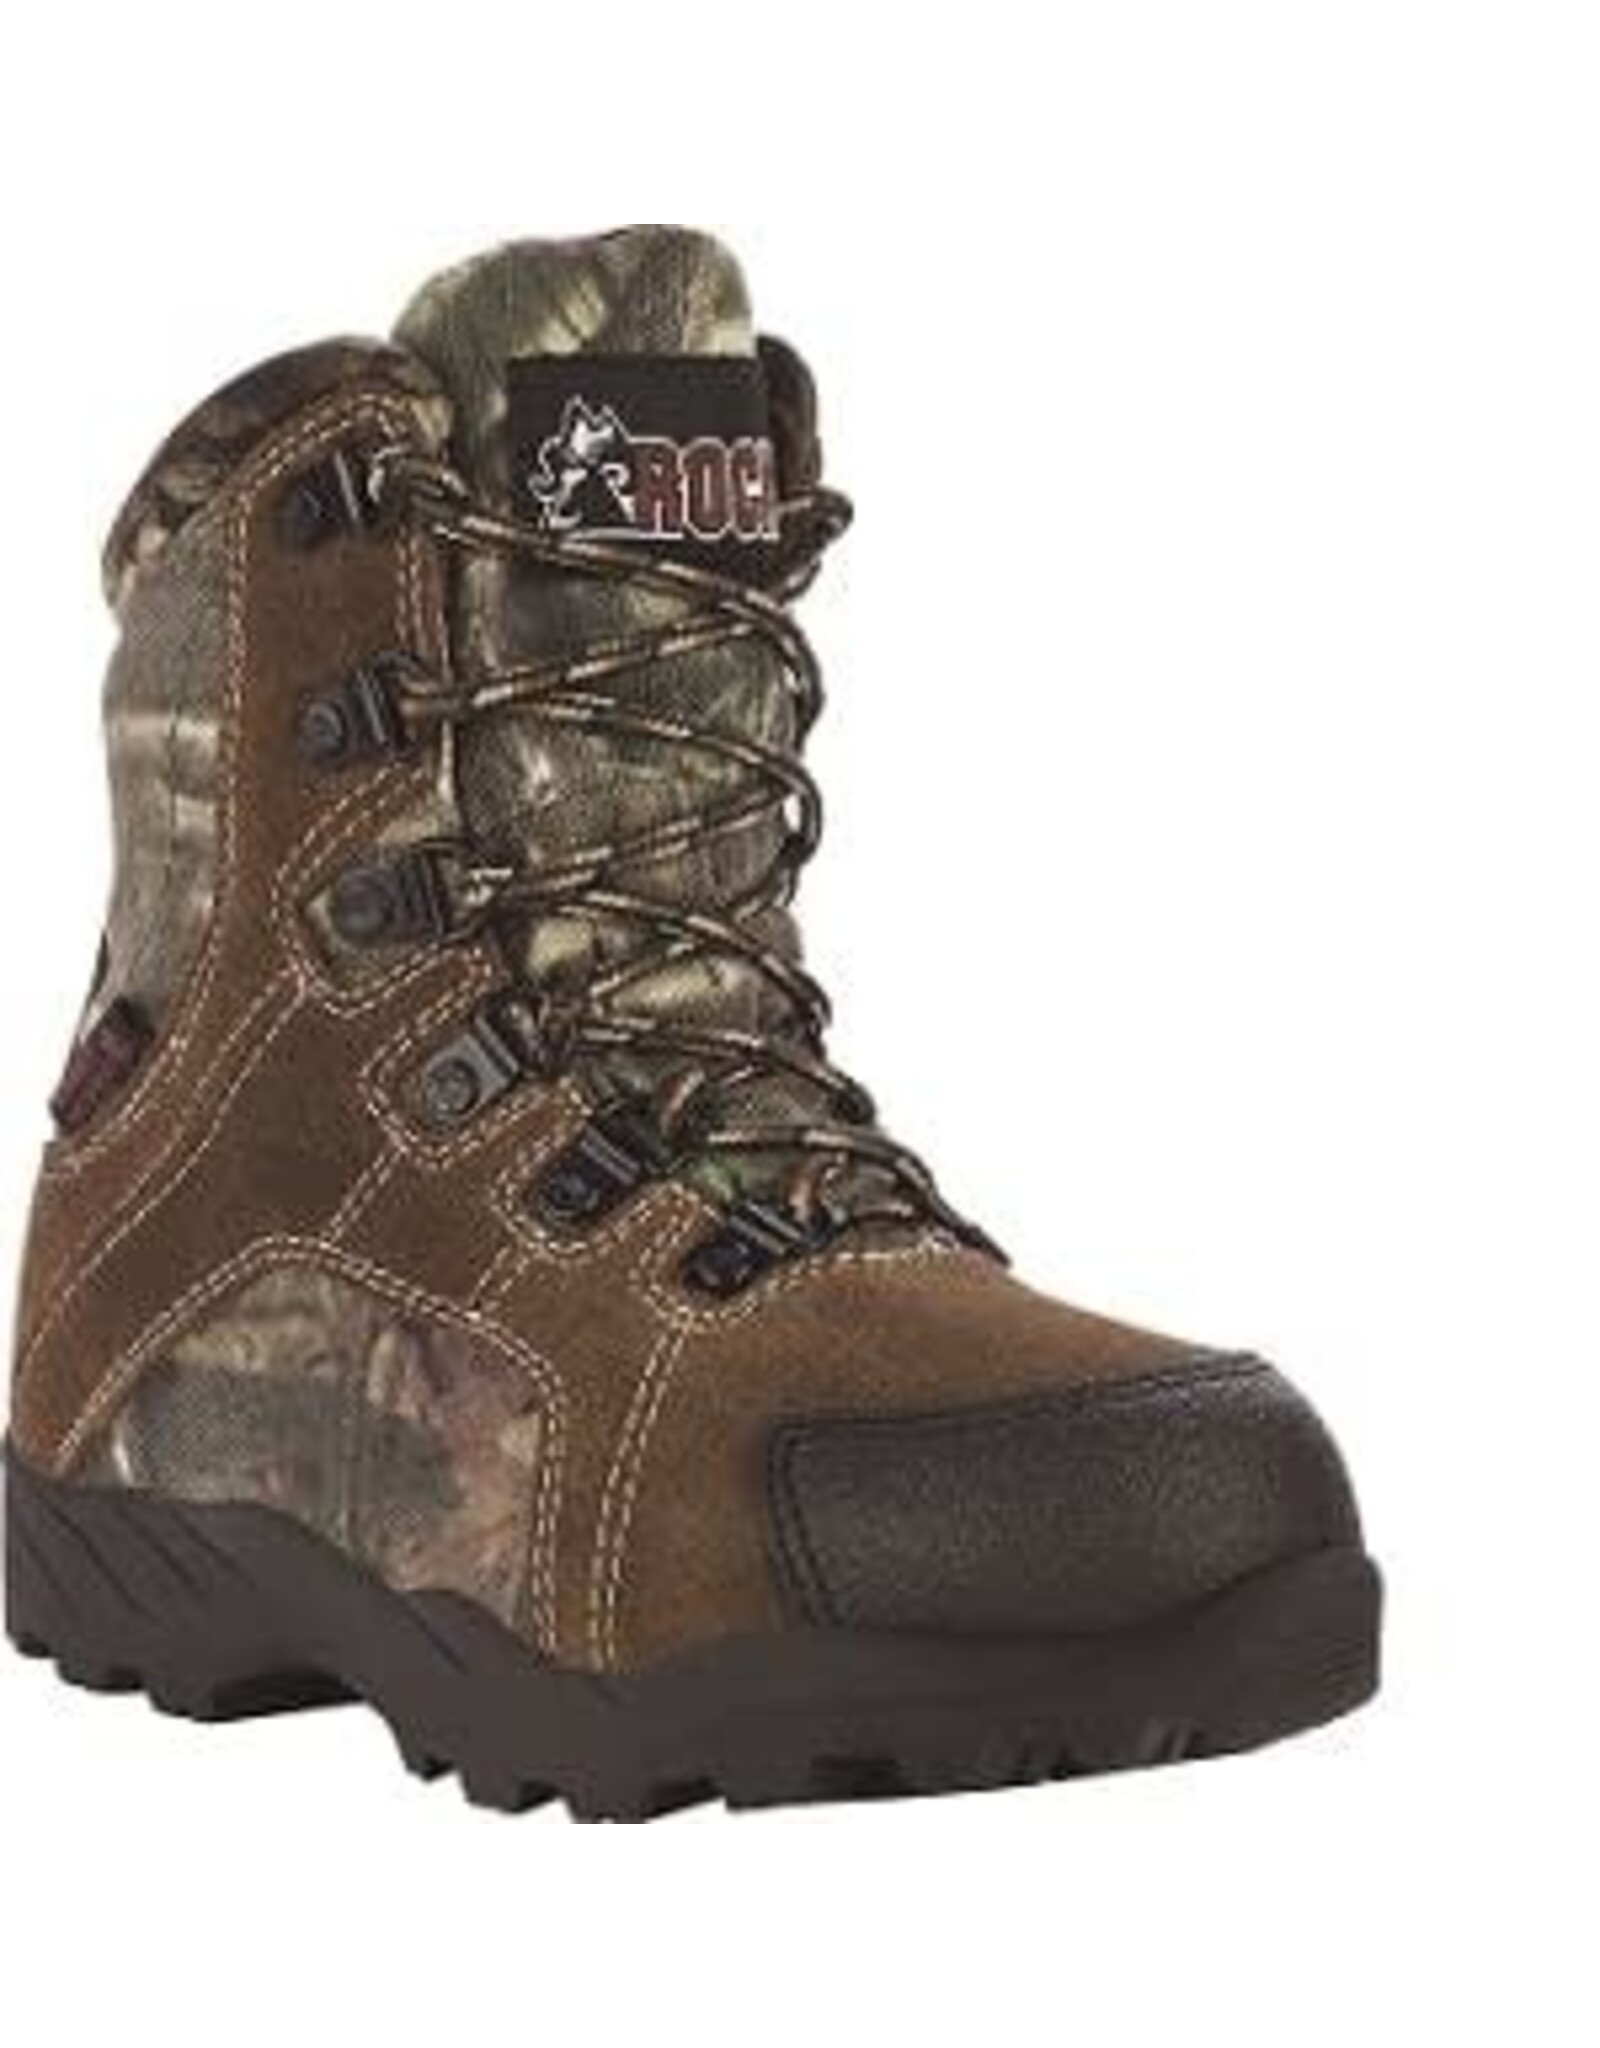 Rocky Mountain YOUTH Rocky Hunter Boots 800gr Insulated  - Size 3